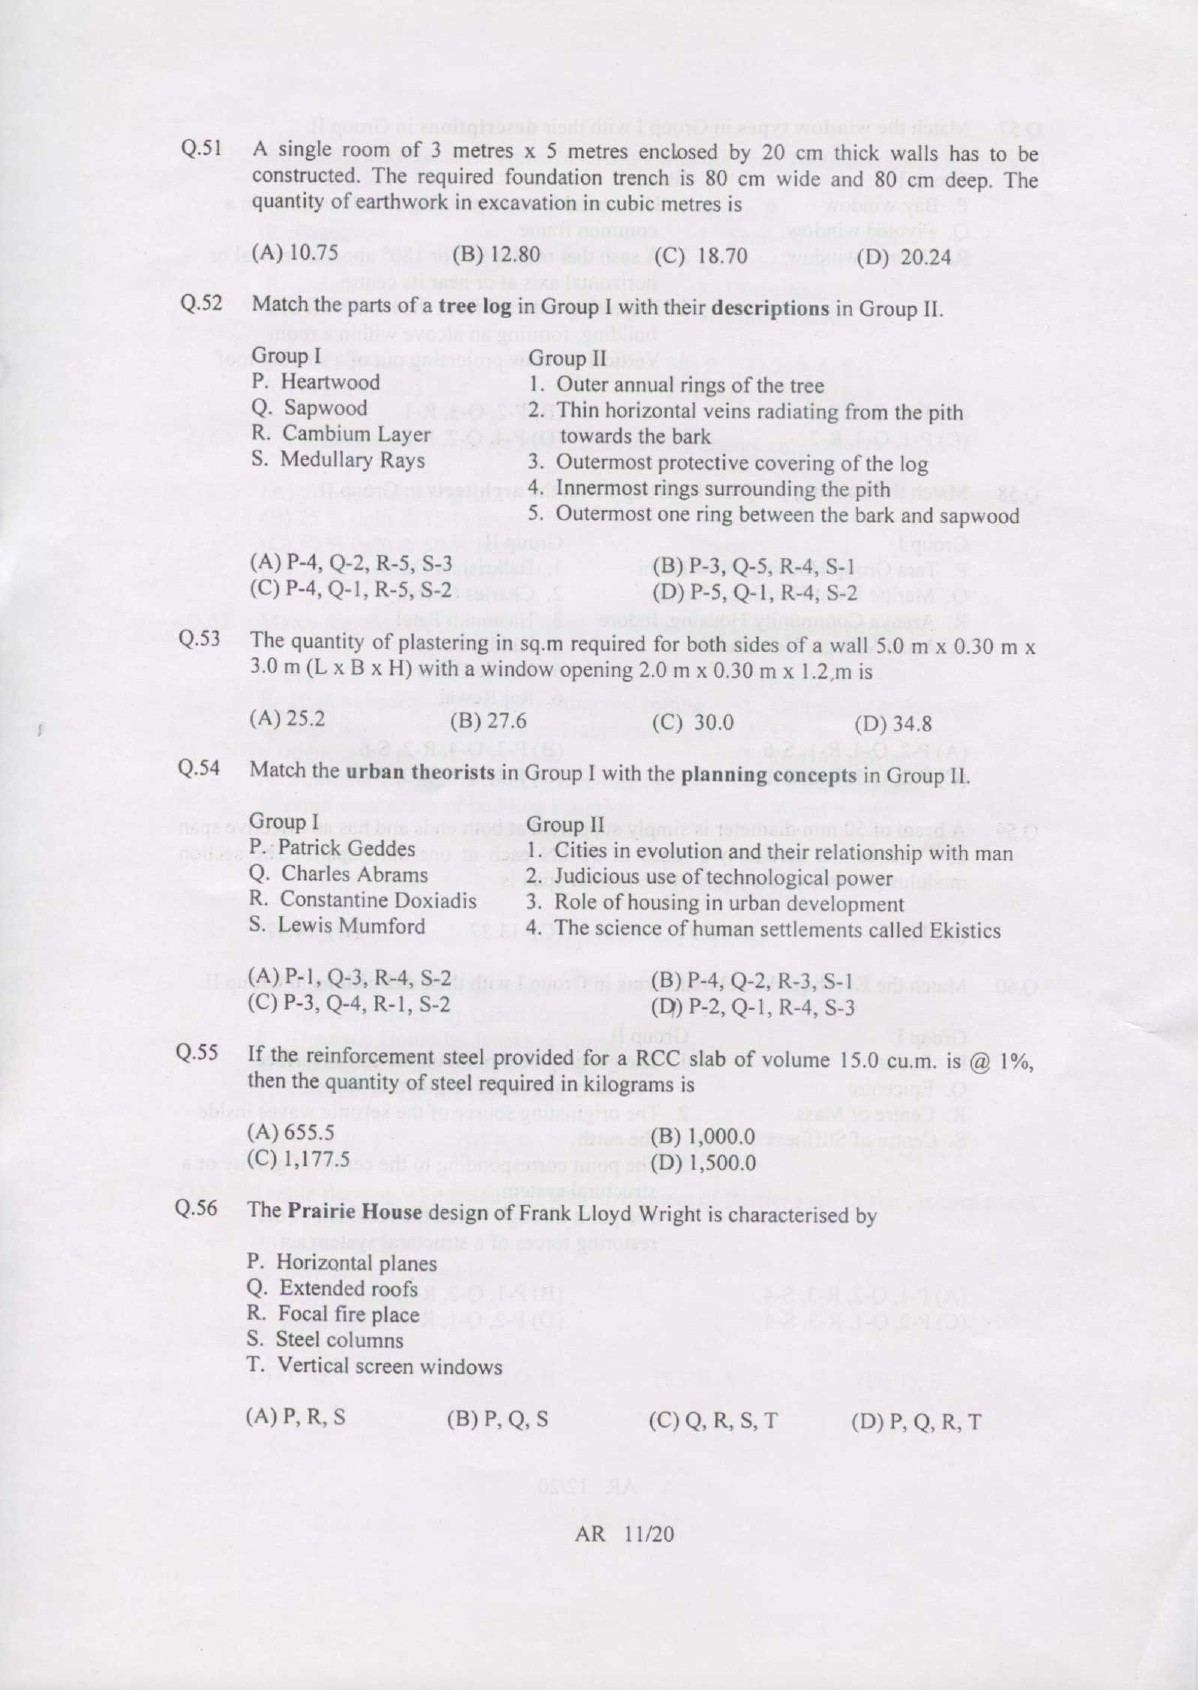 GATE Exam Question Paper 2007 Architecture and Planning 11